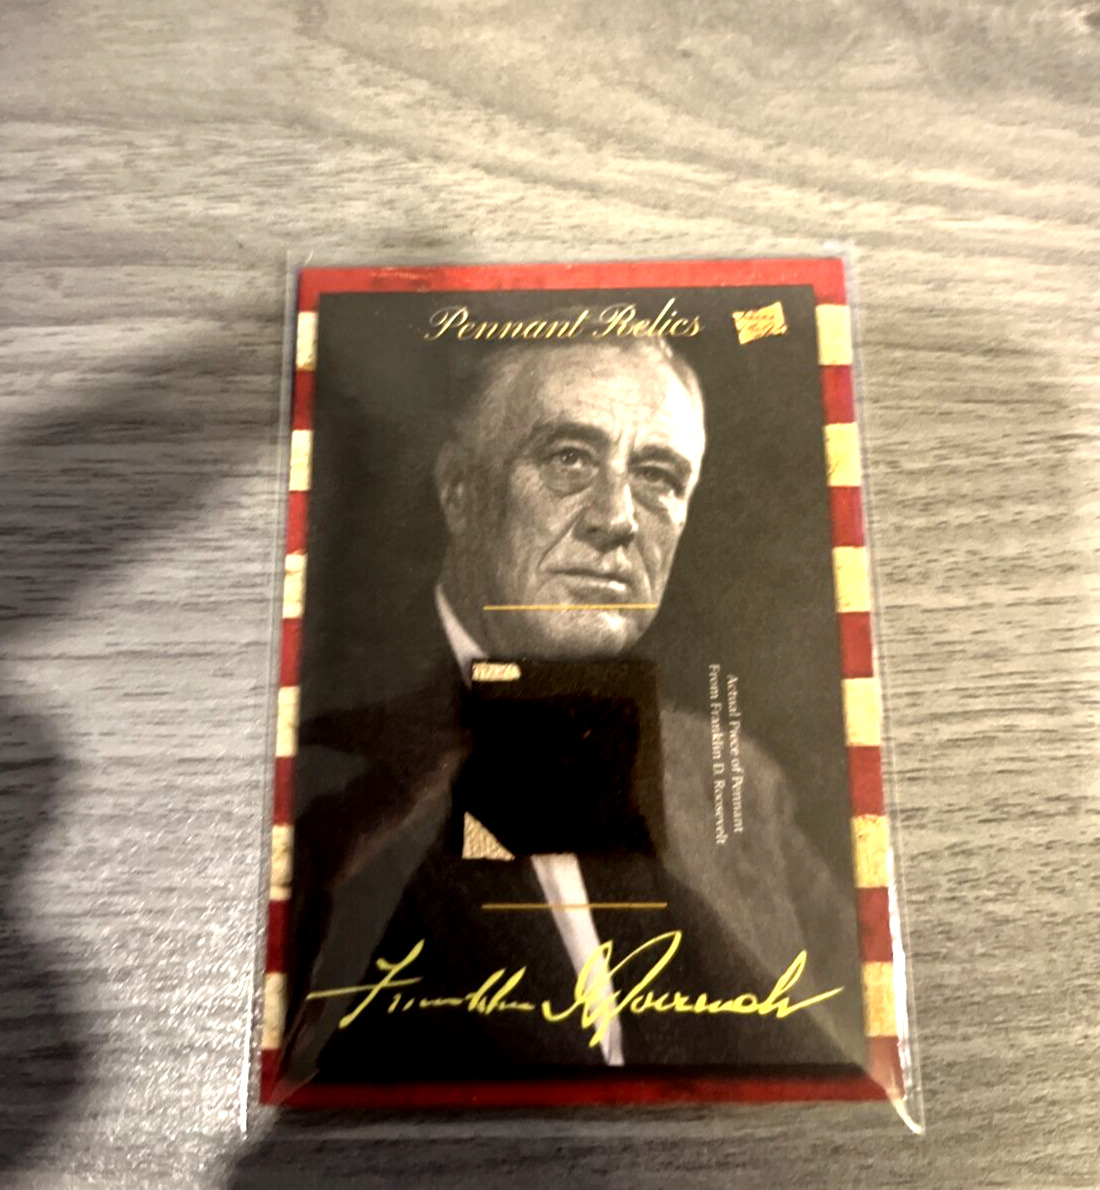 President Franklin Roosevelt Pieces Of The Past AUTHENTIC PENNANT RELIC CARD